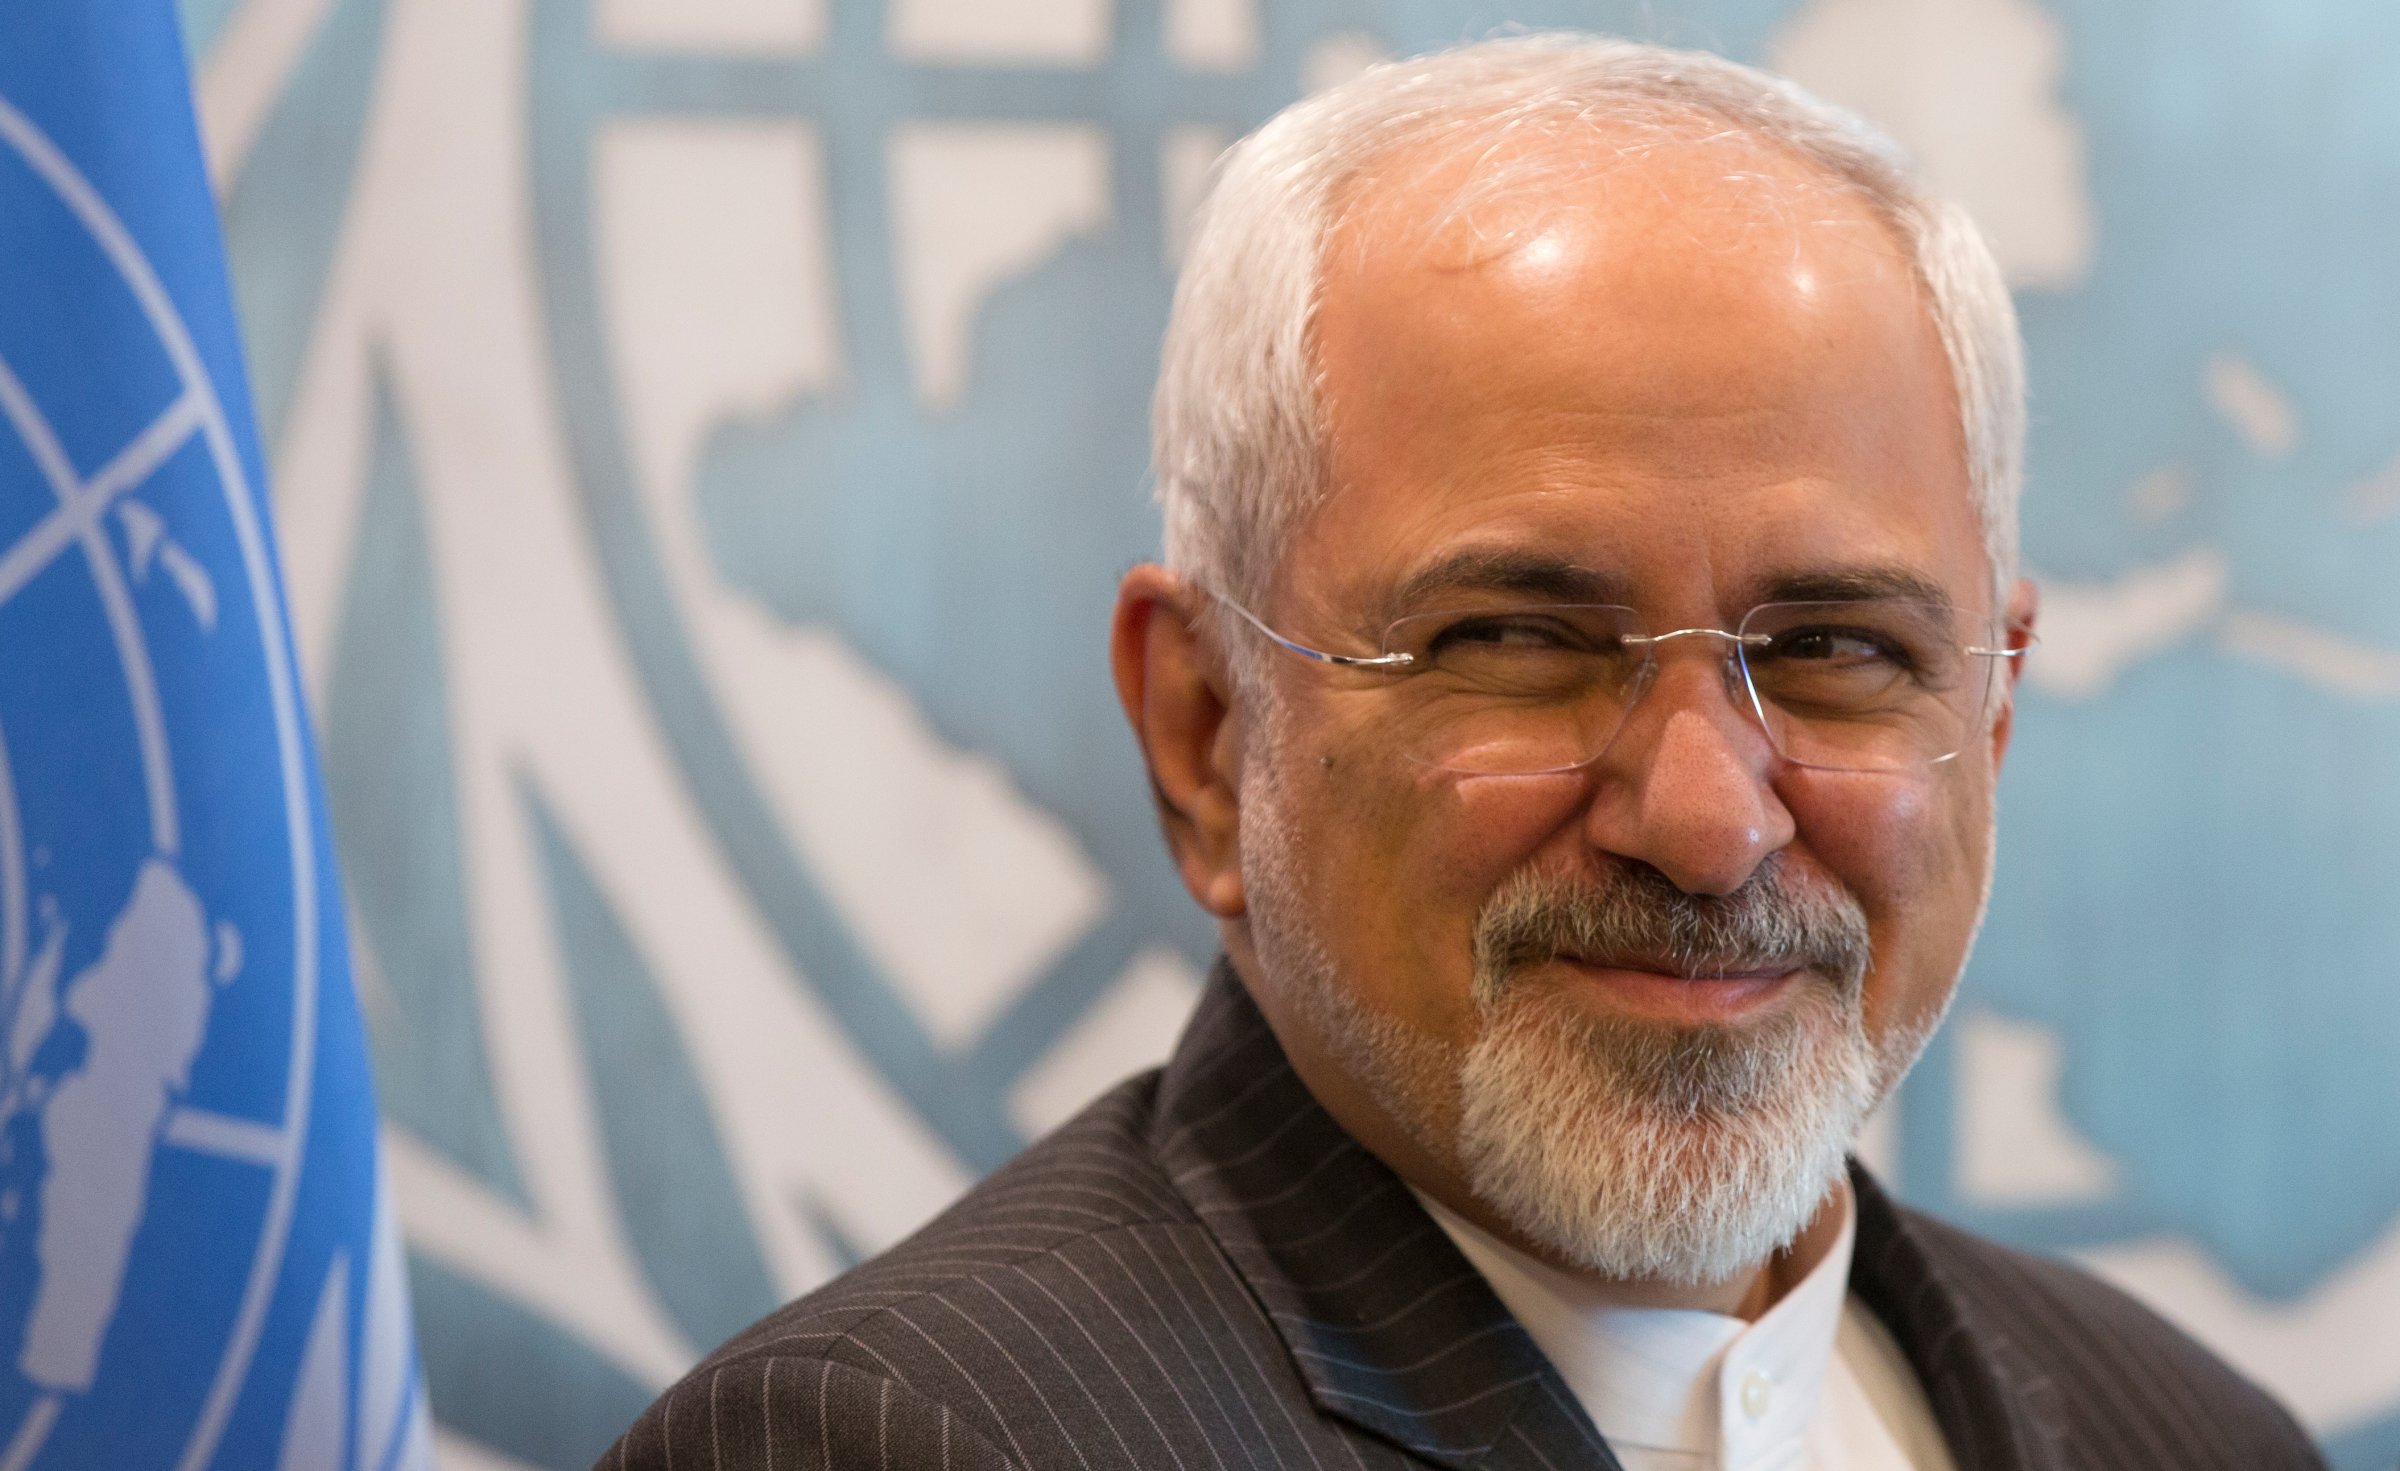 Mohammad Javad Zarif, Minister for Foreign Affairs of the Islamic Republic of Iran at the United Nations Headquarters in New York City.